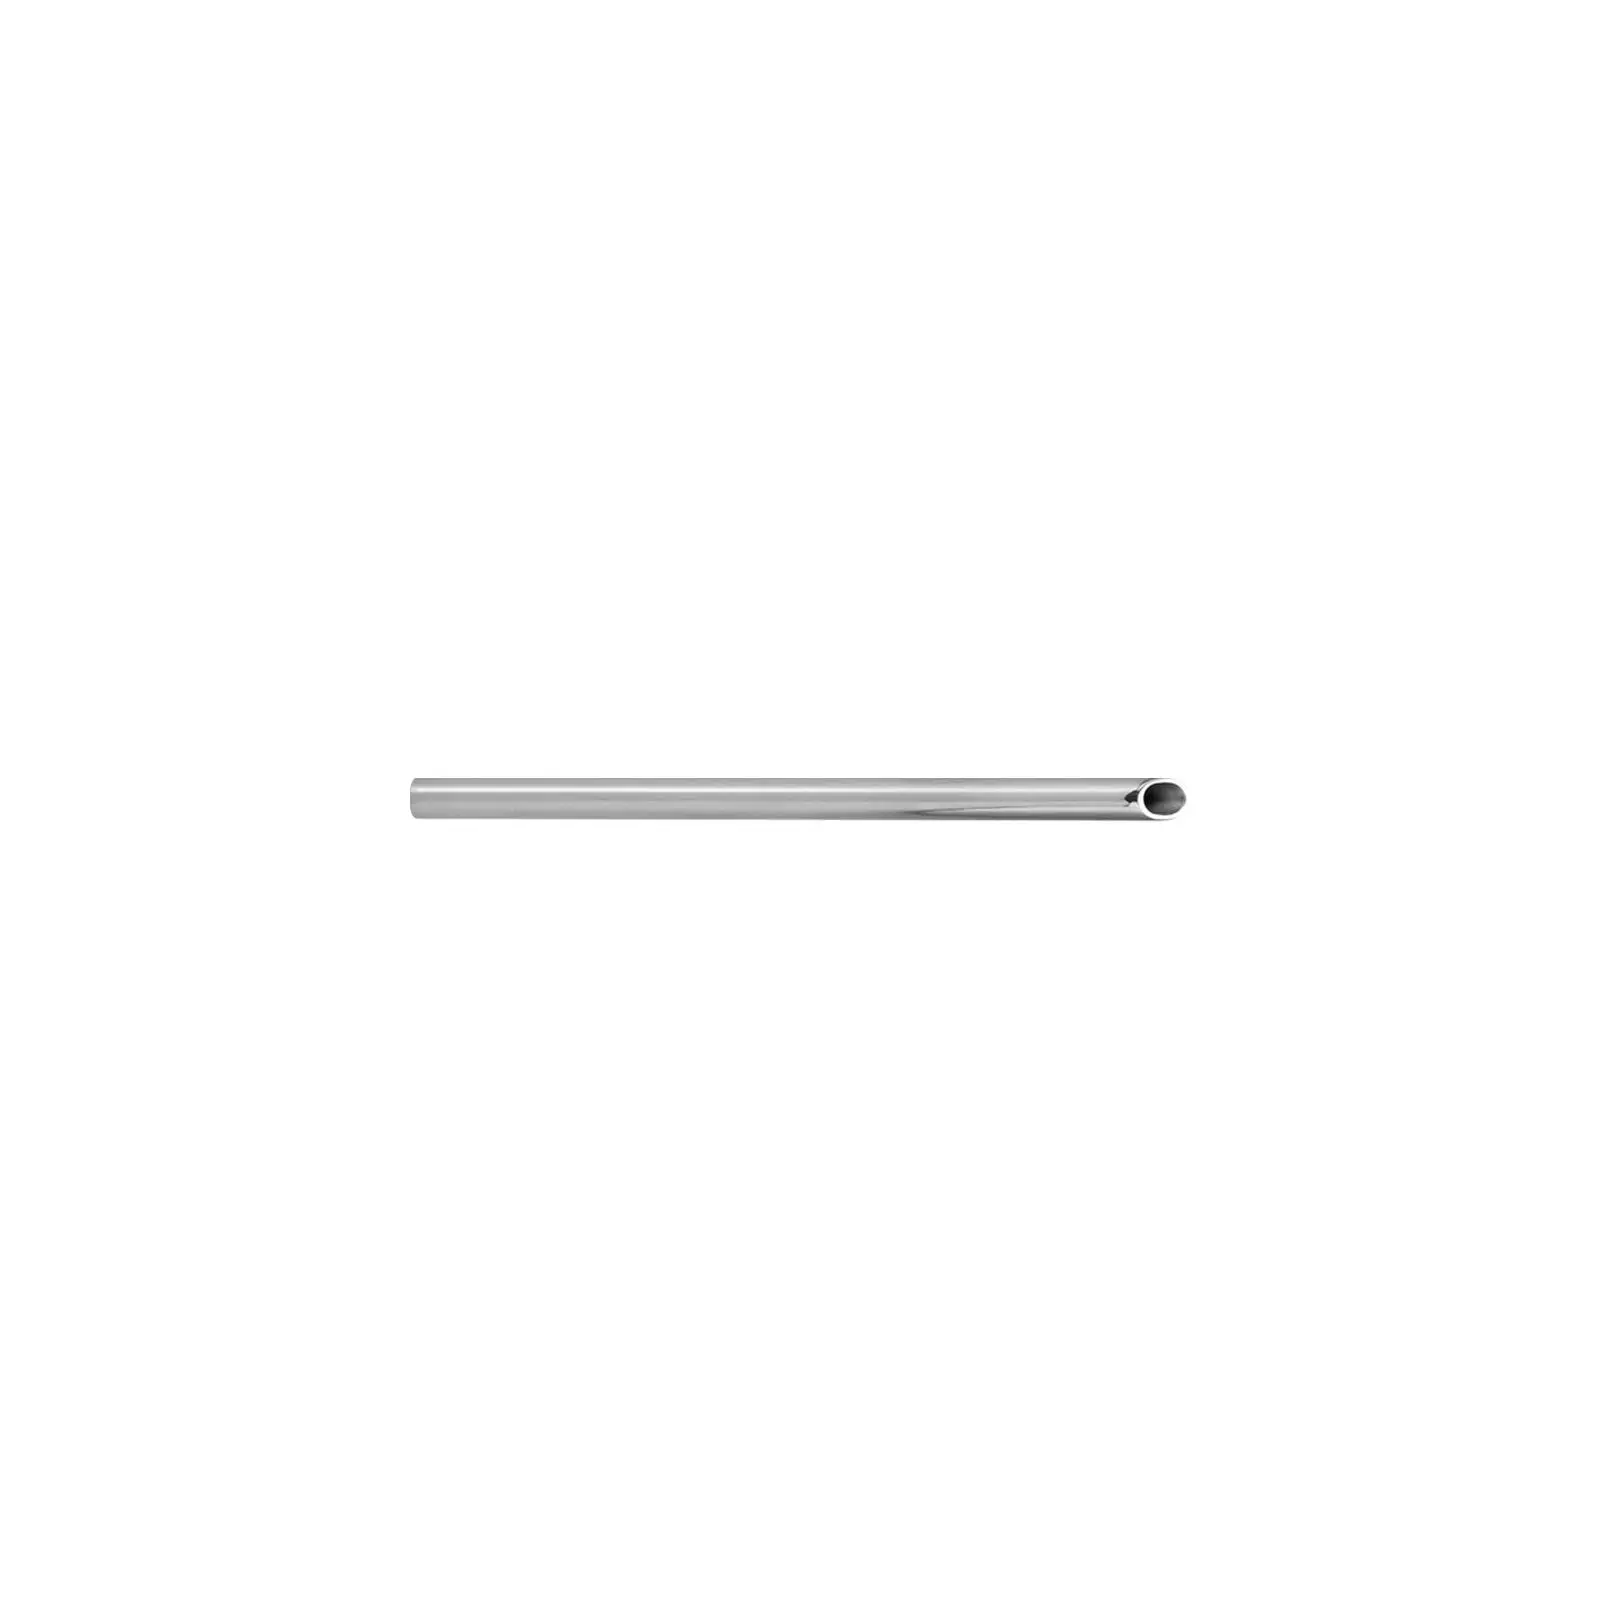 Steel Piercing Receiver Tube Auxiliary Professional Tool Accessory Easy to Use Length 7.5cm for Body Navel Ear